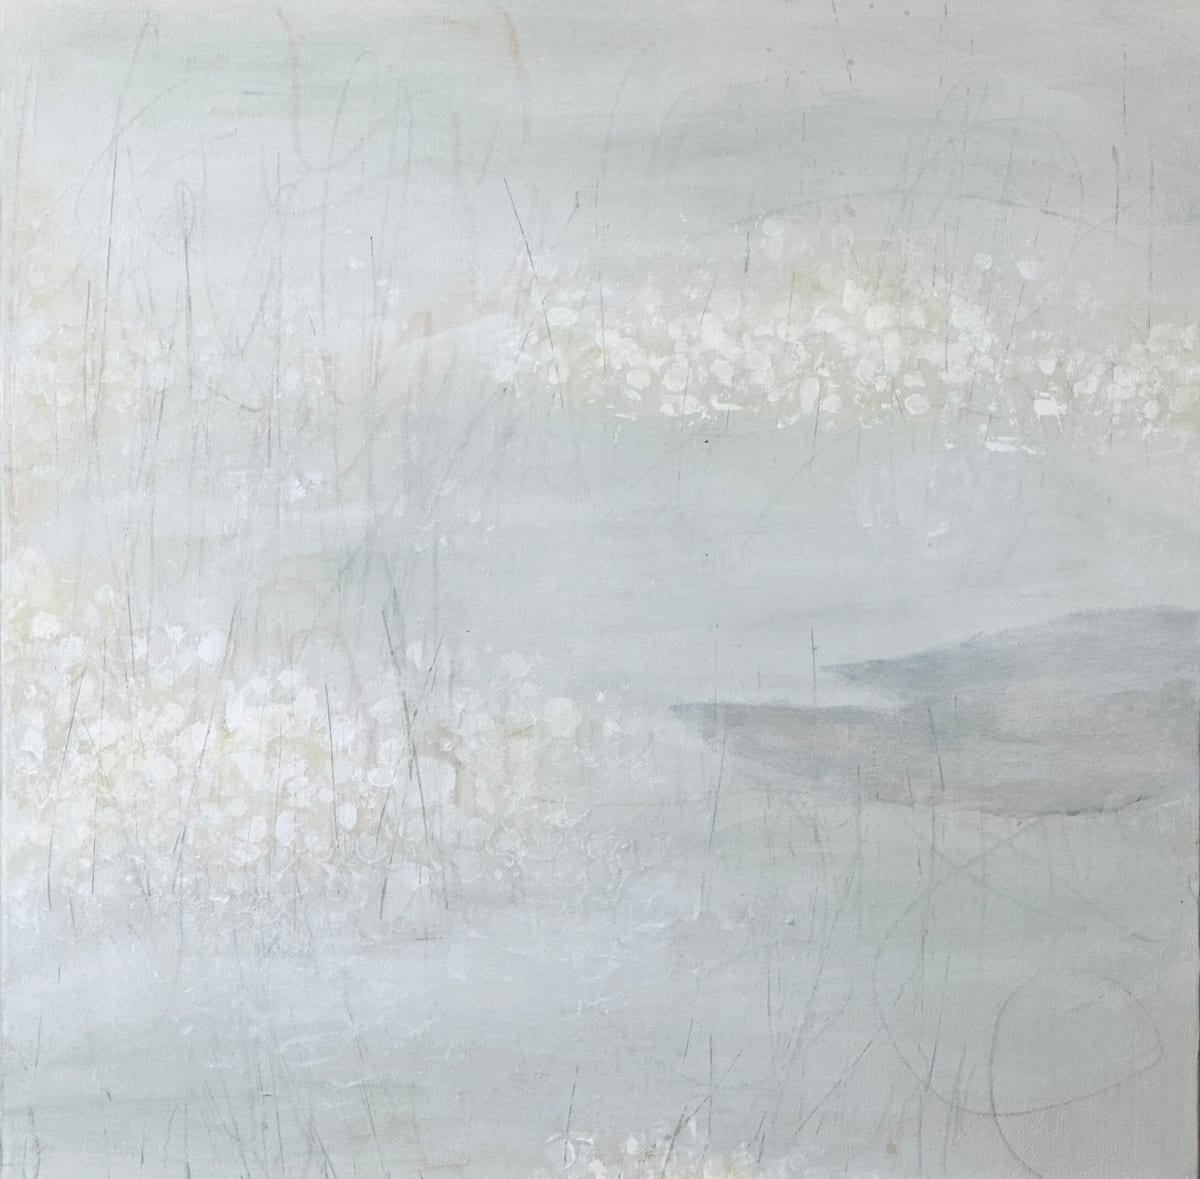 The Pond in February 6, From the Nature’s Botanics Portfolio, 2023, Acrylic on canvas, 24 x 24 inches. by Juanita 